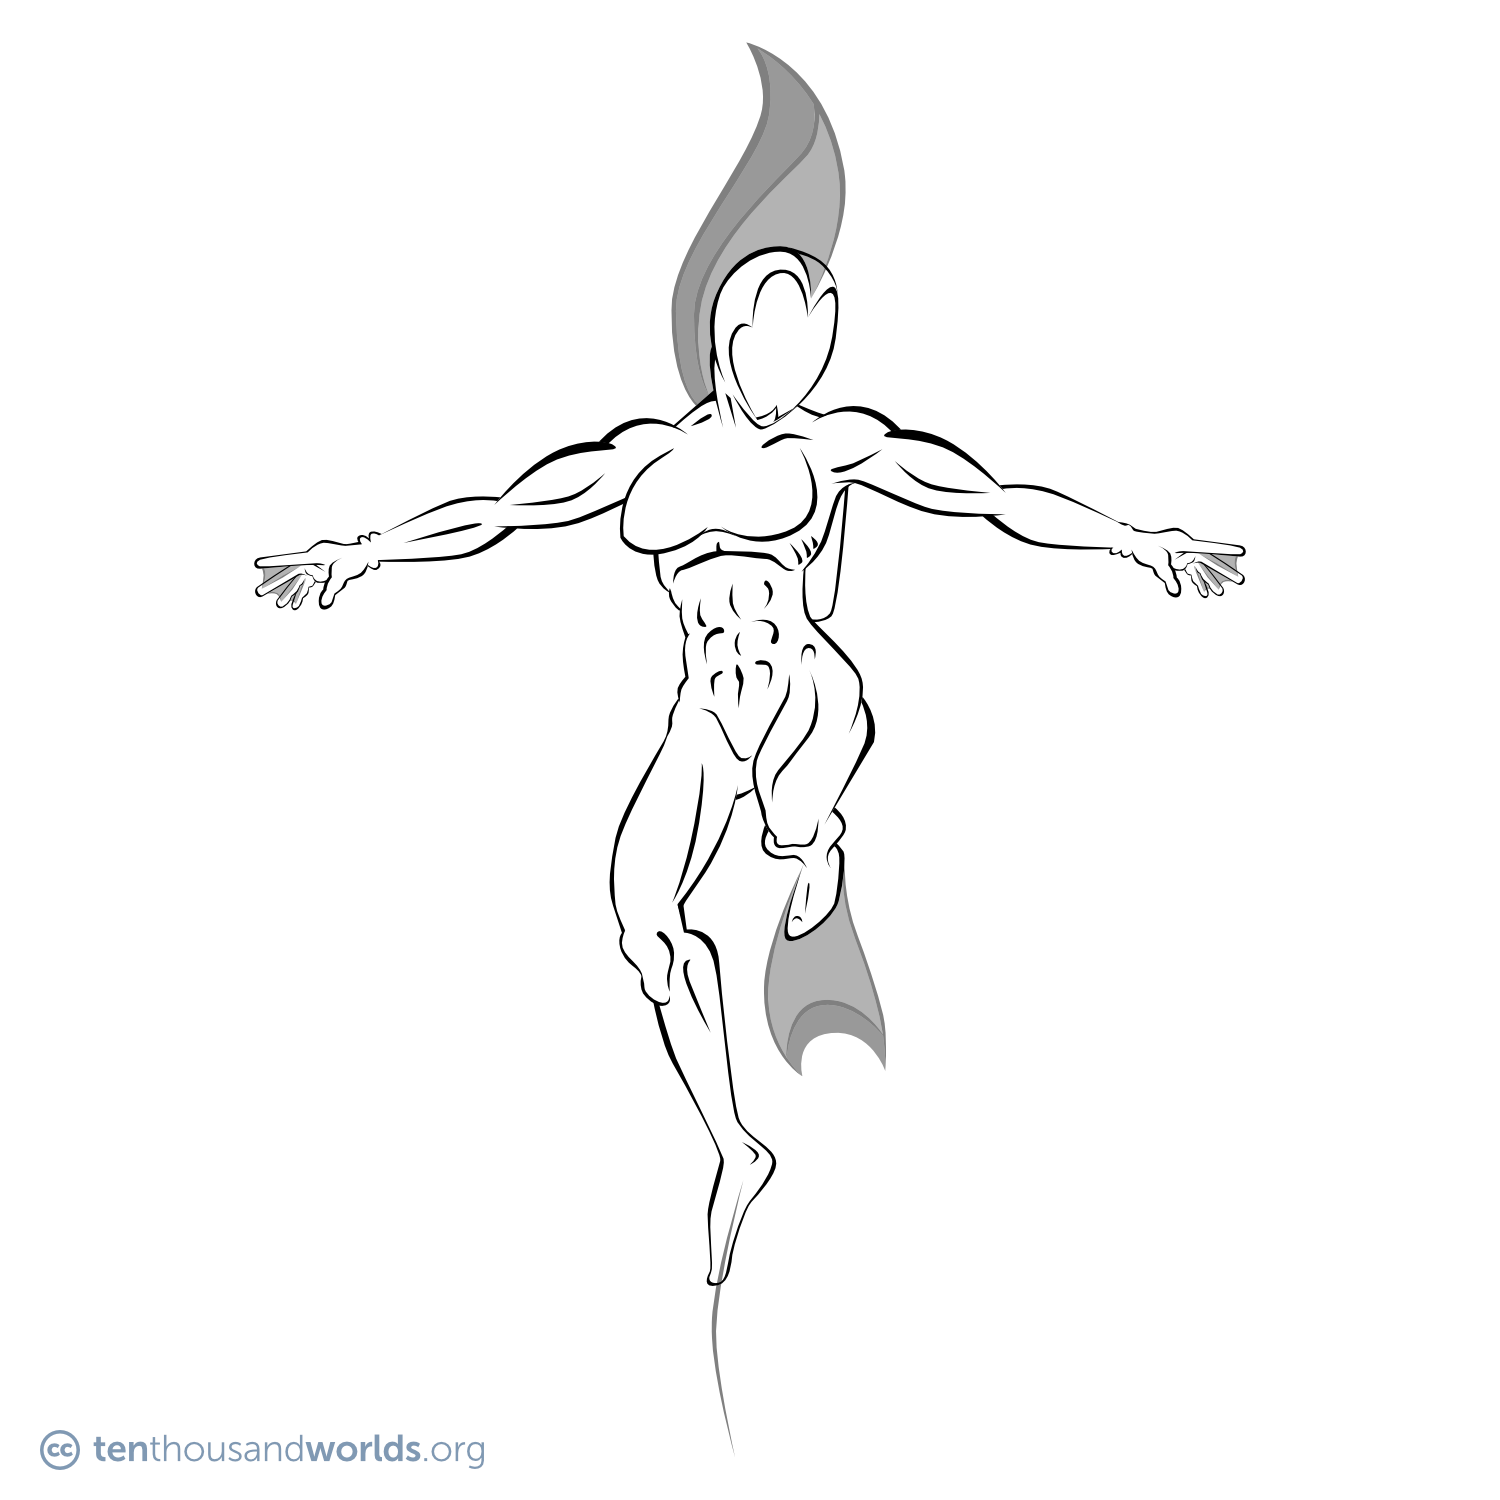 A ink outline of a woman in a streamlined diving suit with an oval glass helmet and a large dorsal fin running down the length of the suit.